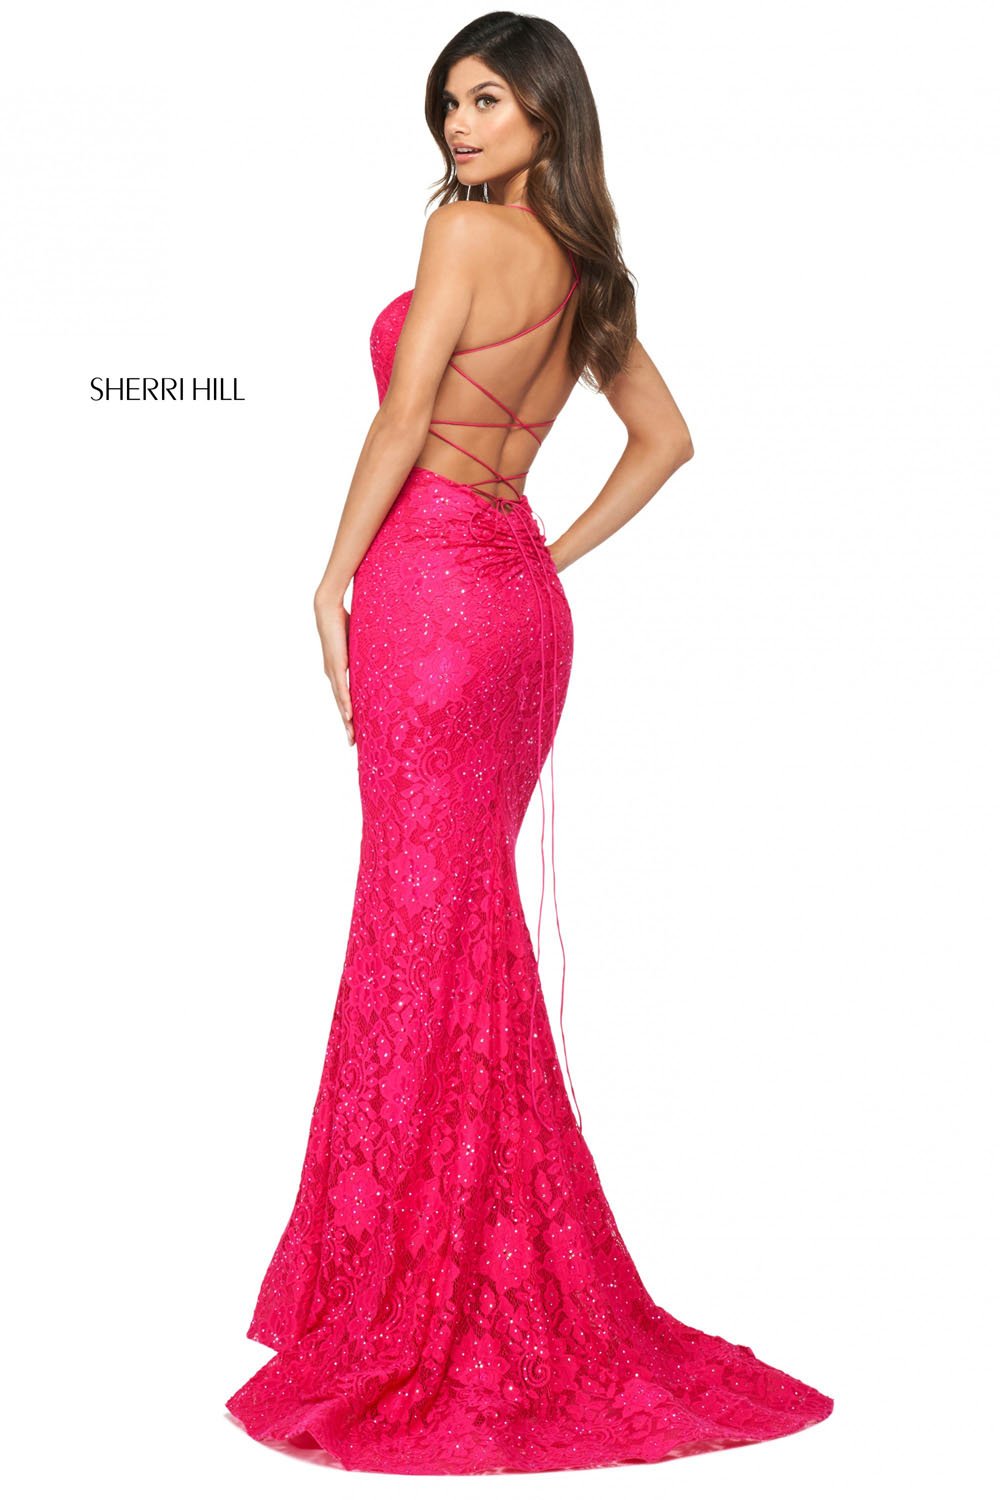 Sherri Hill 53359 dress images in these colors: Black, Red, Ivory, Royal, Peacock, Yellow, Navy, Dark Red, Blush, Coral, Teal, Aqua, Bright Pink, Light Yellow, Jade, Pink.